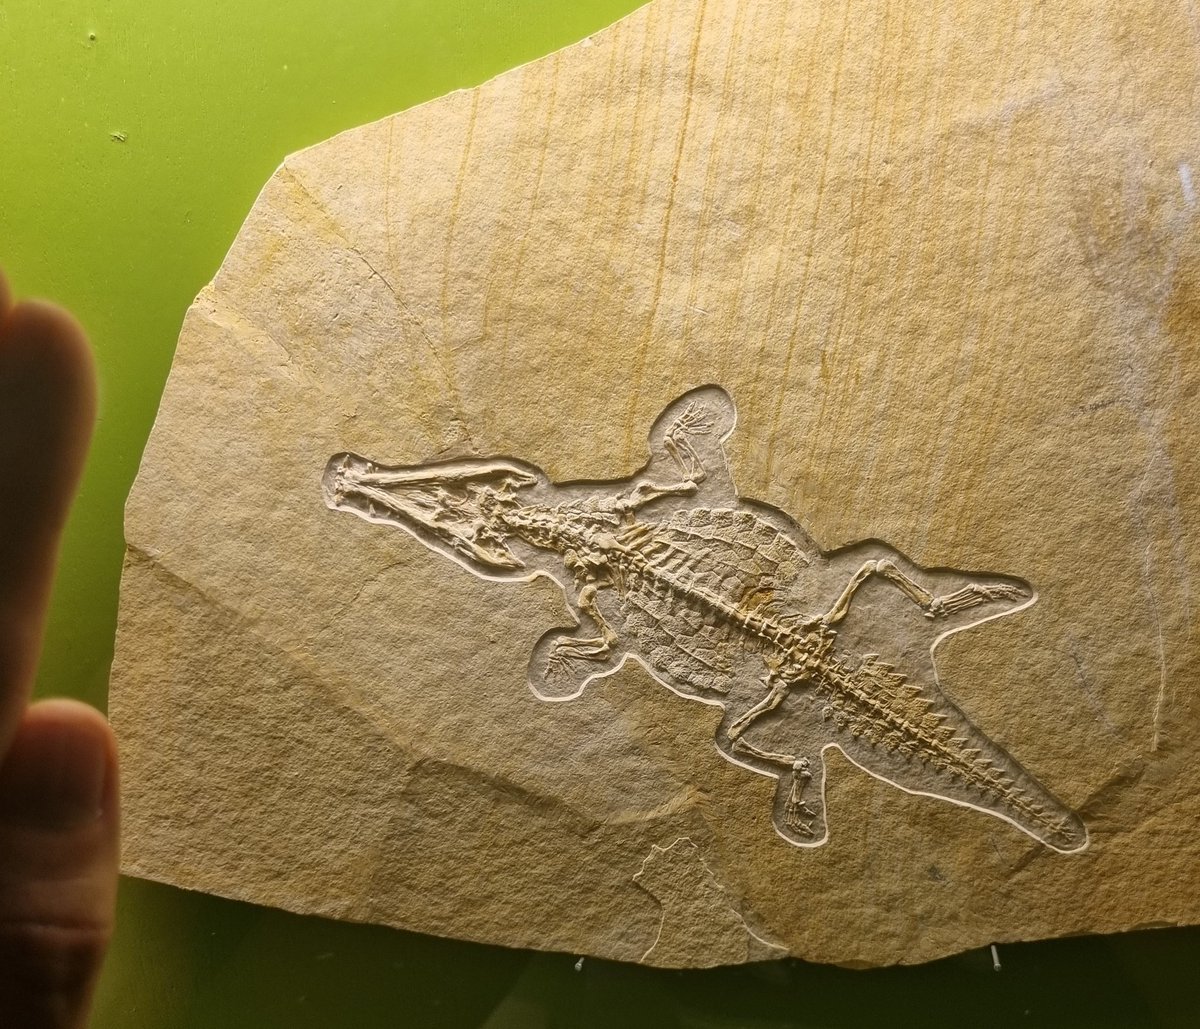 The most beautiful, incredibly rare baby crocodile. Happy #FossilFriday 🐊 ​Nicknamed “Brunni”, this ~20 cm long fossil represents the only known hatchling of a Jurassic species called Crocodilaemus robustus. Found within the Solnhofen Archipelago in Germany.